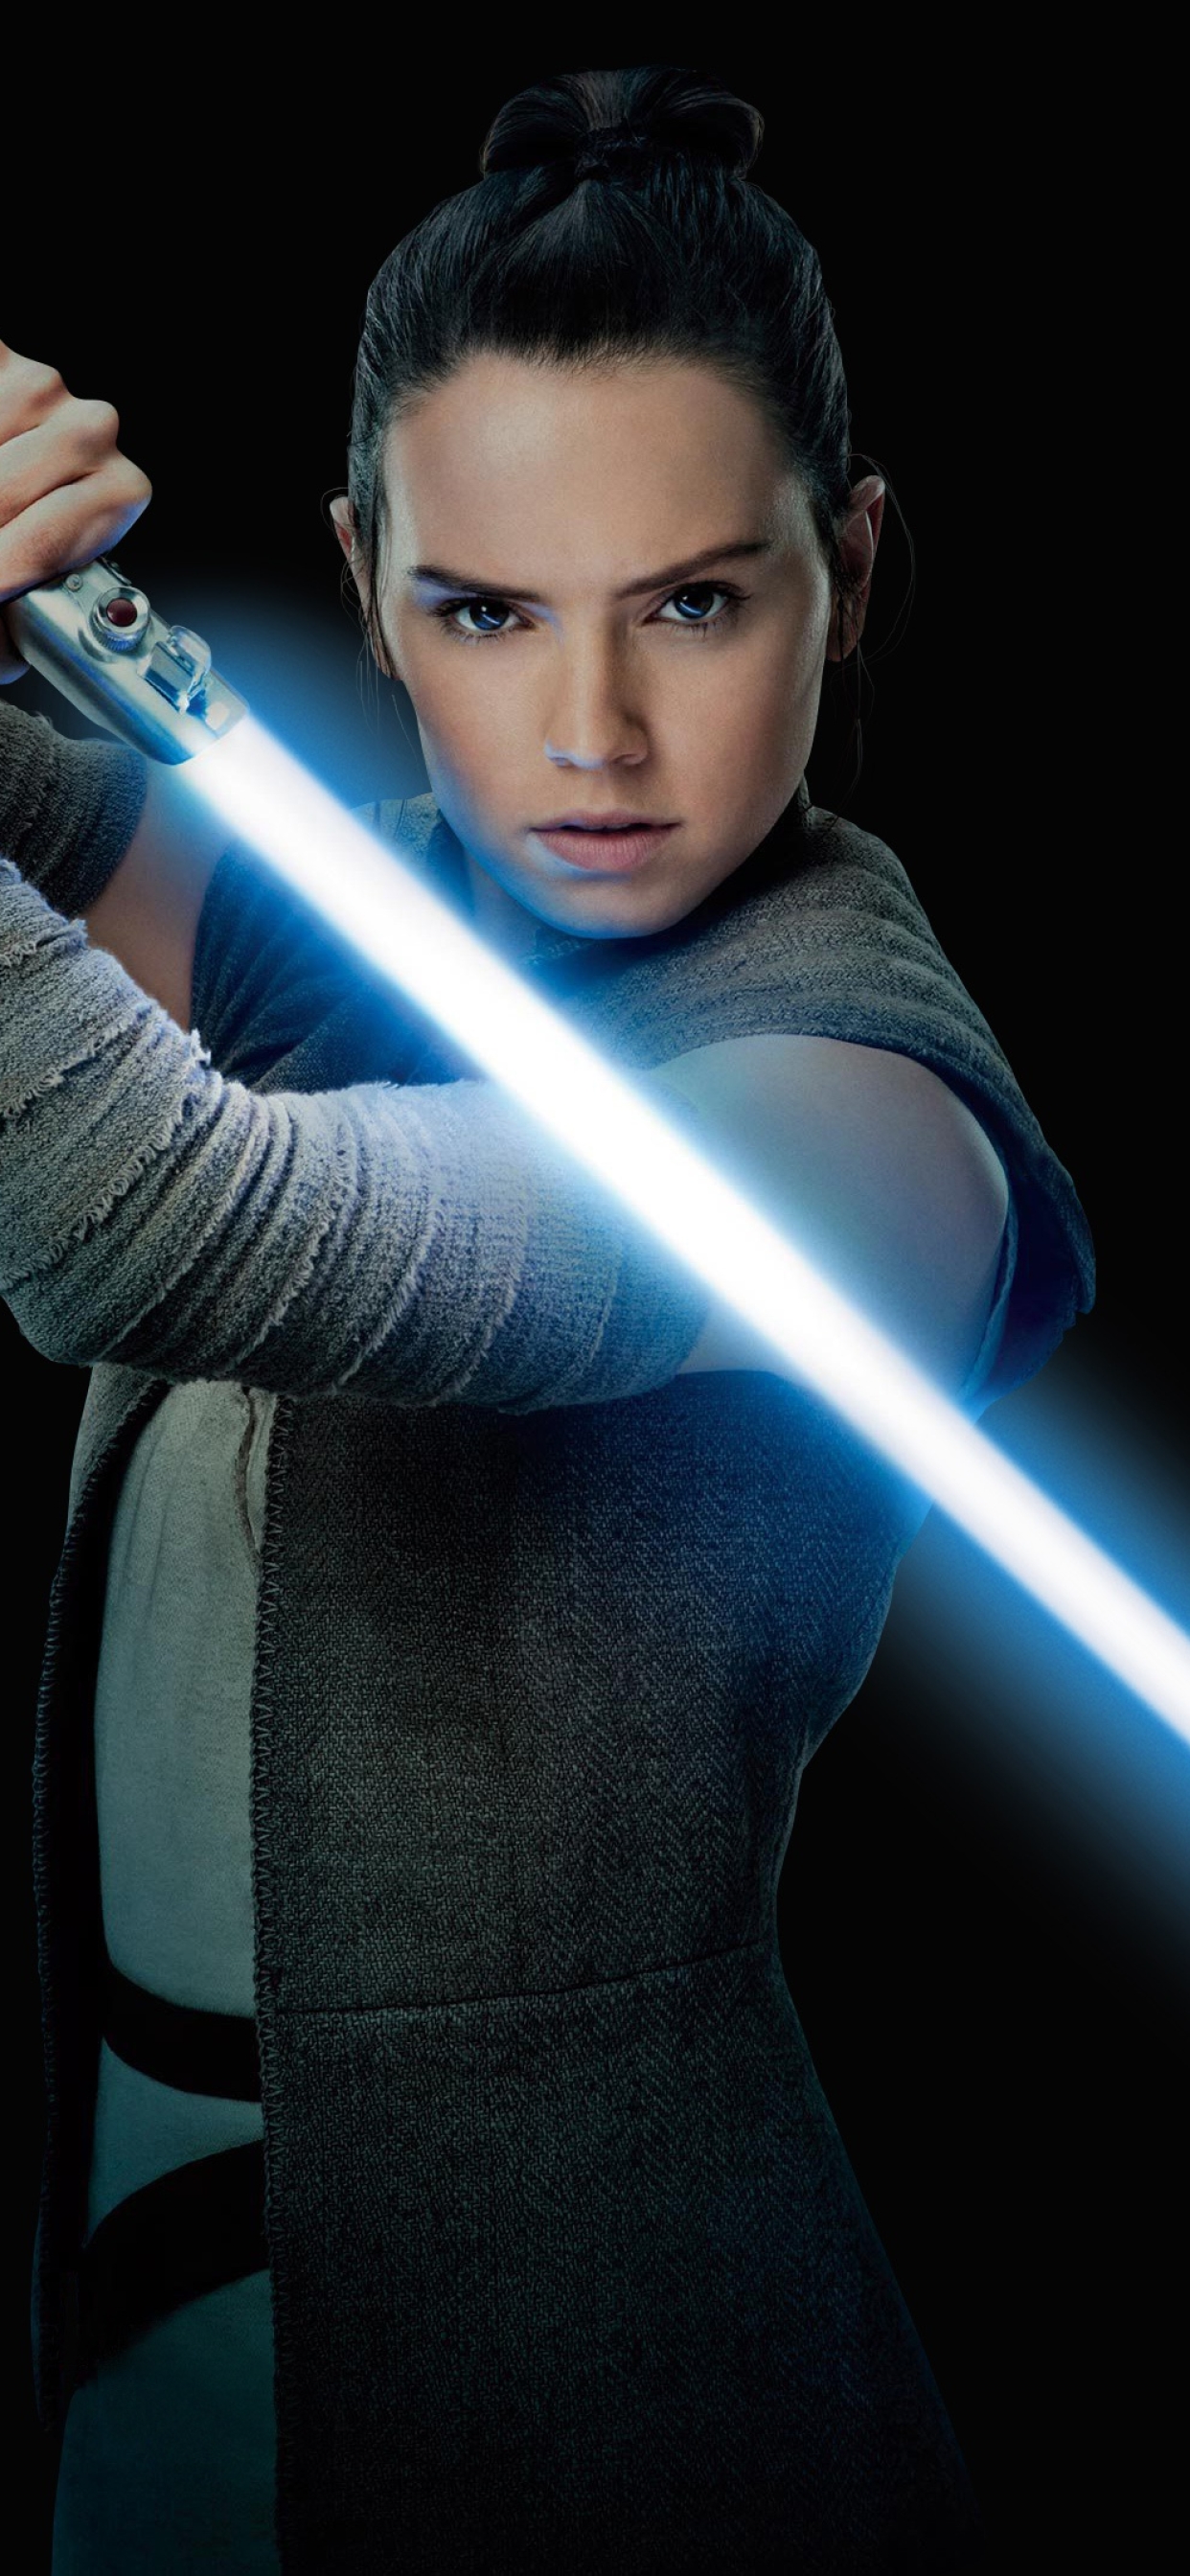 1242x2688 Daisy Ridley As Rey Star Wars In The Last Jedi Iphone Xs Max Wallpaper Hd Movies 4k Wallpapers Images Photos And Background